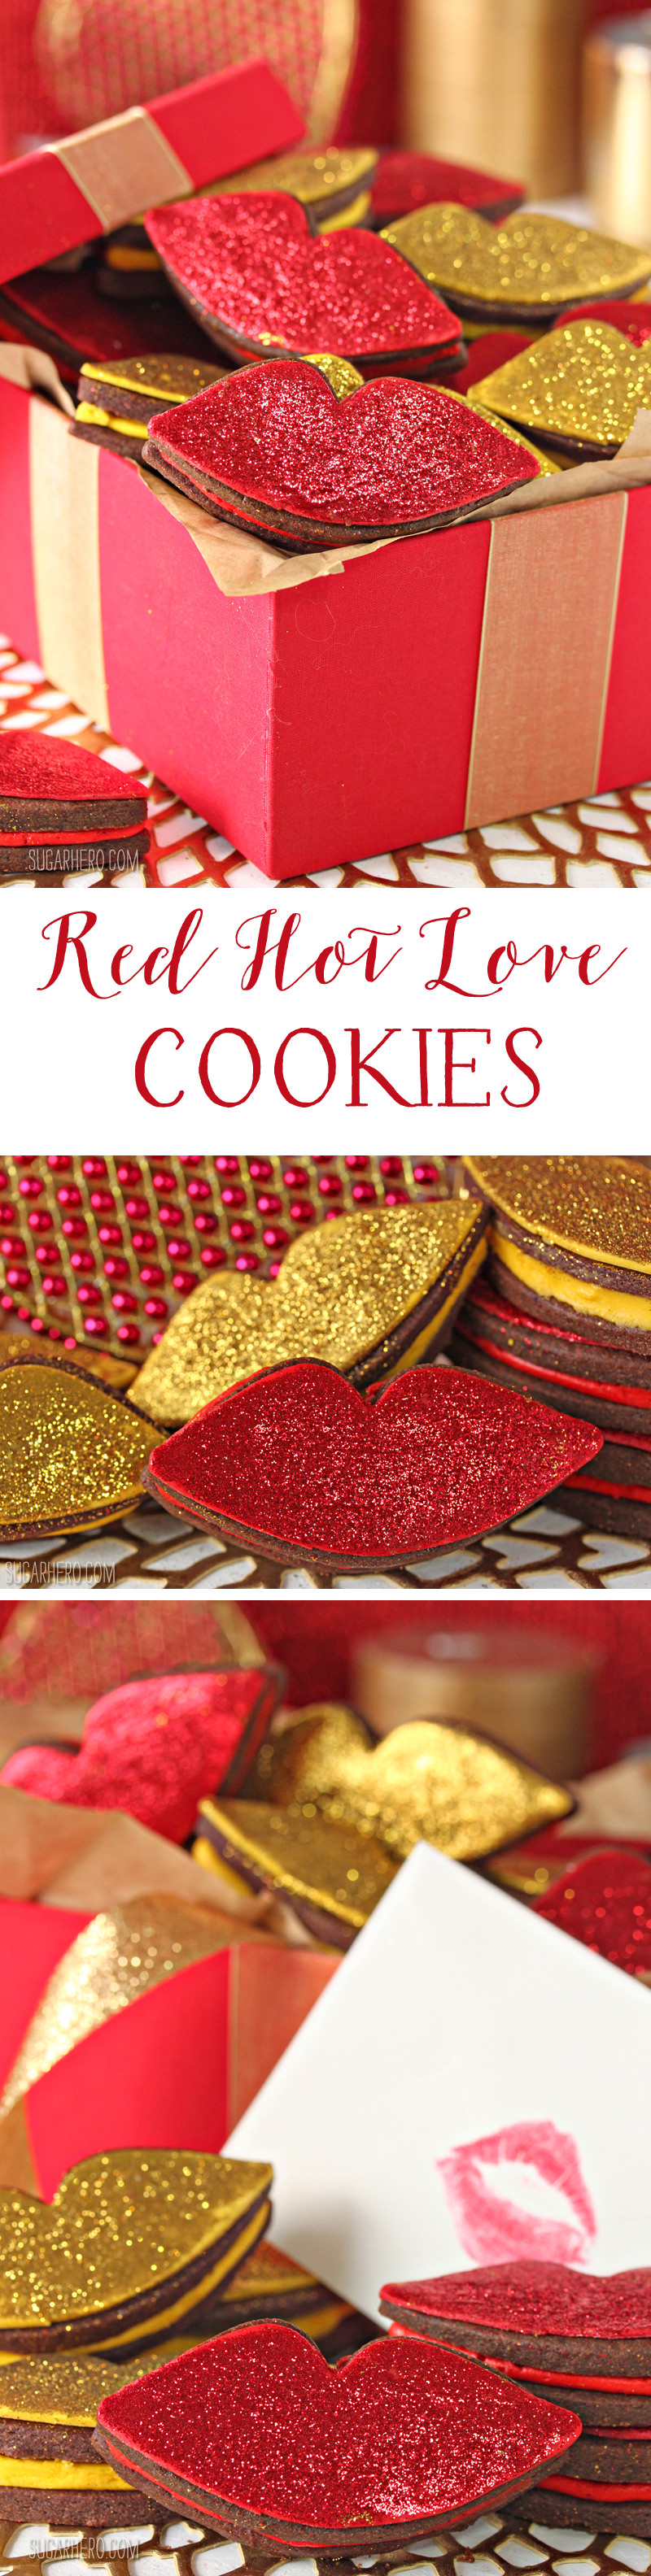 Red Hot Love Cookies - rich chocolate cookies sandwiching a spicy cinnamon buttercream, and finished with gorgeous glittery decorations! | From SugarHero,com